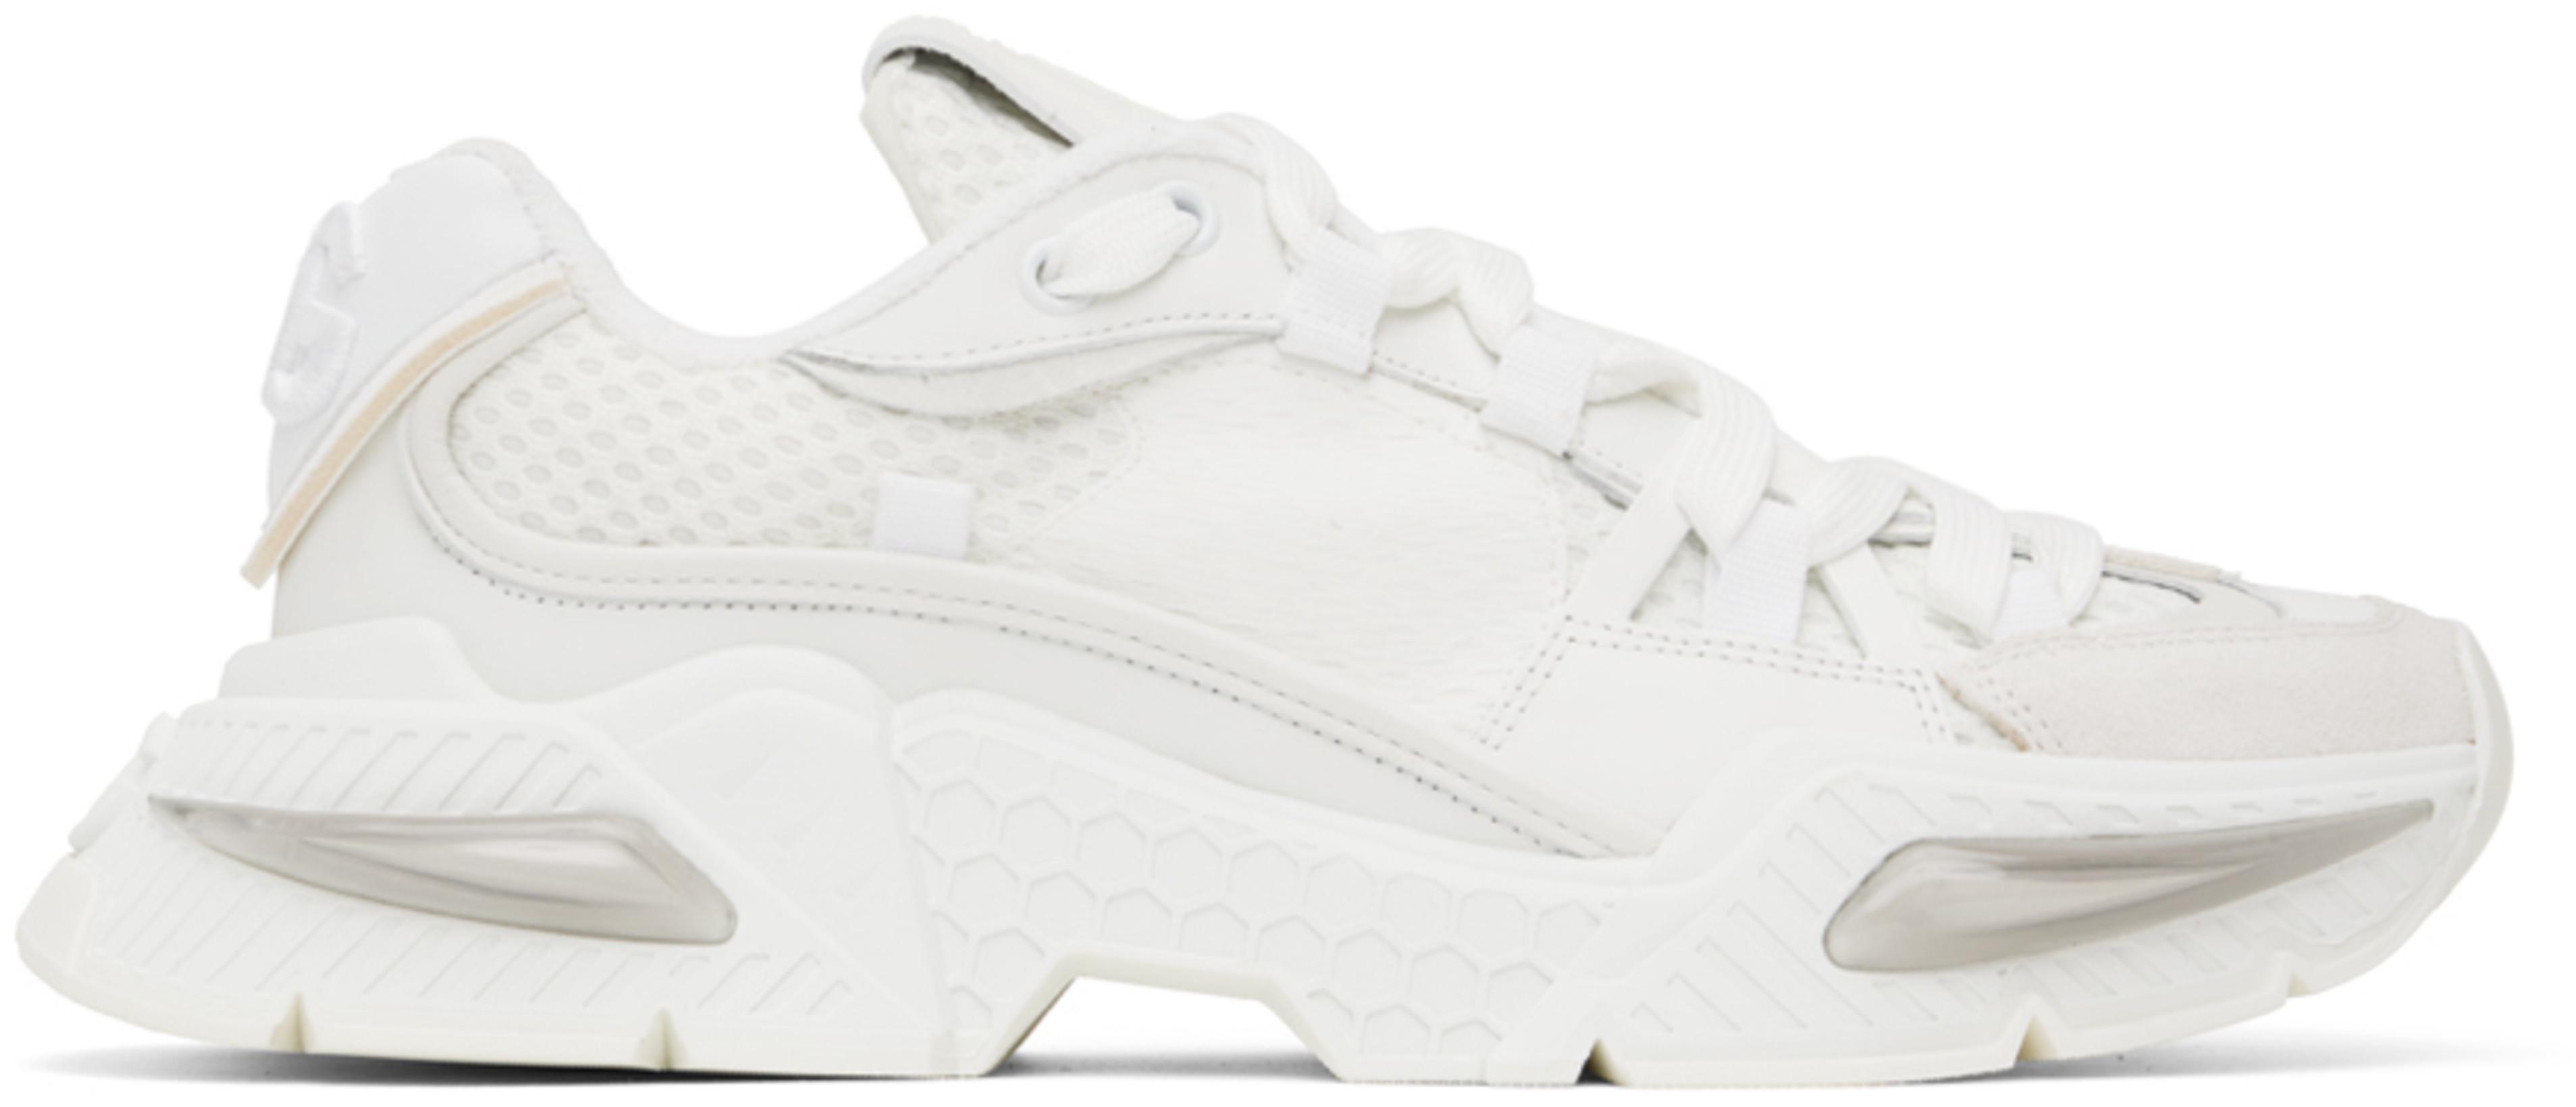 White Airmaster Sneakers by DOLCE&GABBANA